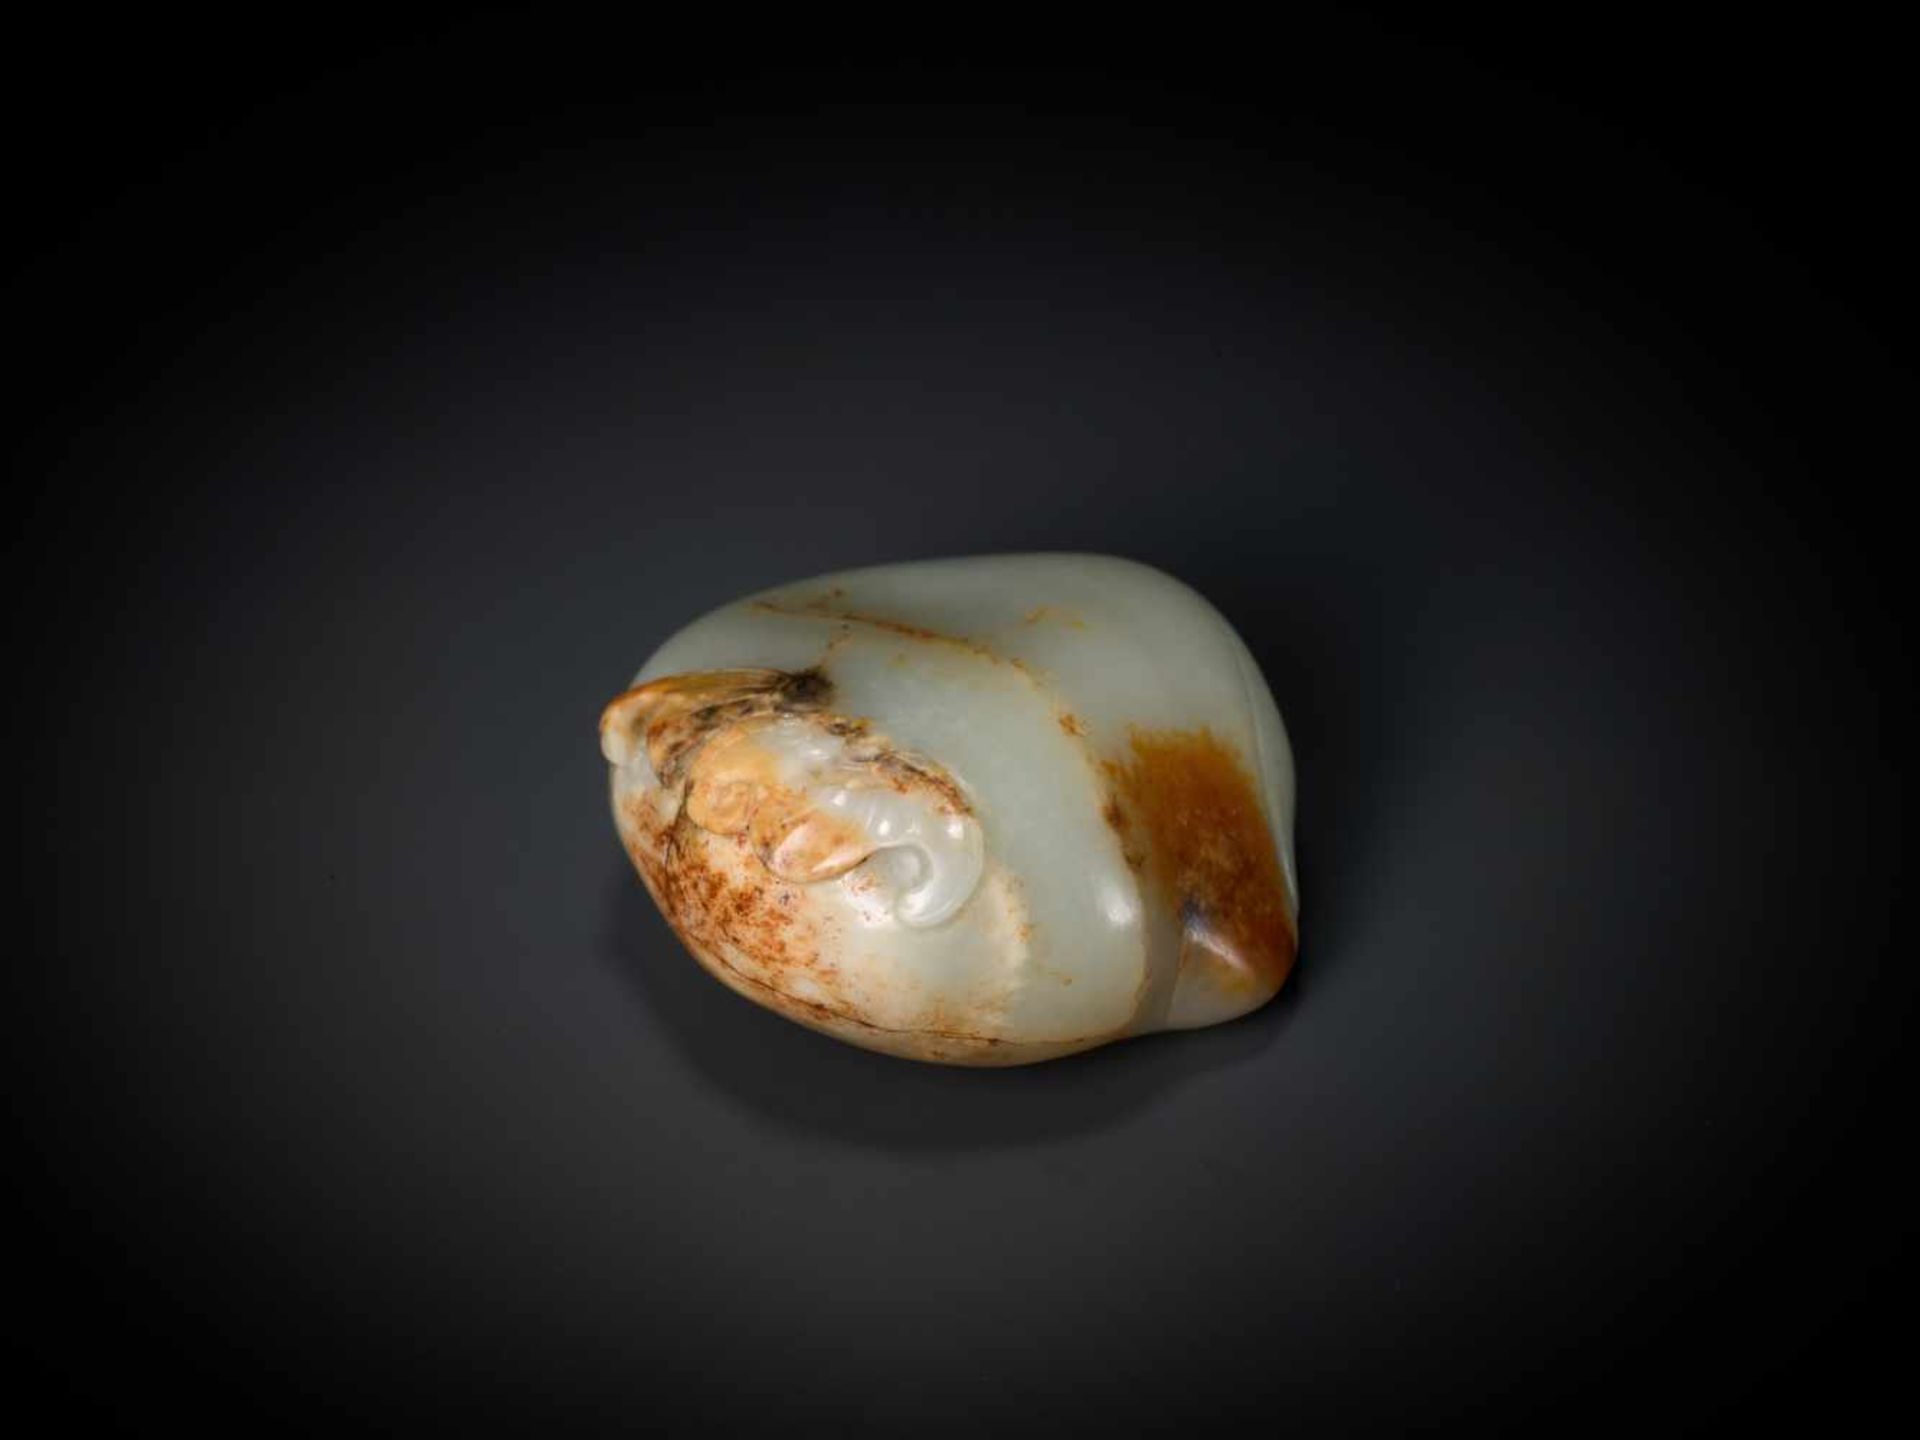 AN 18th CENTURY CELADON AND RUSSET JADE ‘PEACH AND BATS’ PEBBLE Light celadon color jade with russet